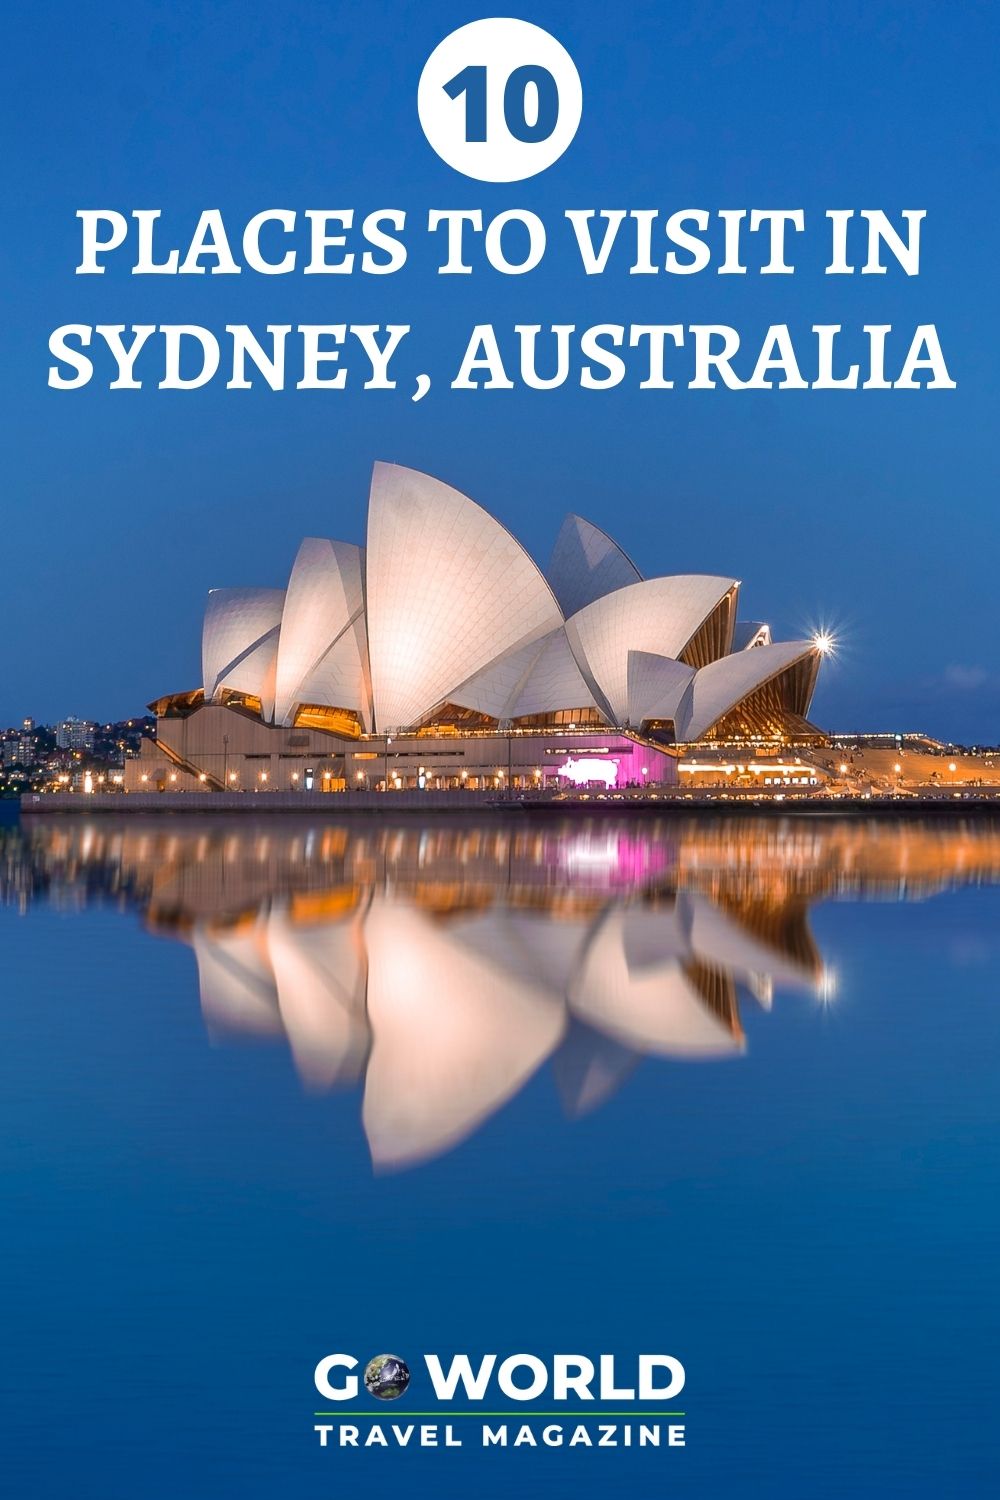 Beautiful Sydney has a long list things to see like the famous Sydney Harbor and Opera House. Here are the 10 best places to visit in Sydney.  #sydneyaustralia #thingstodoinsydney